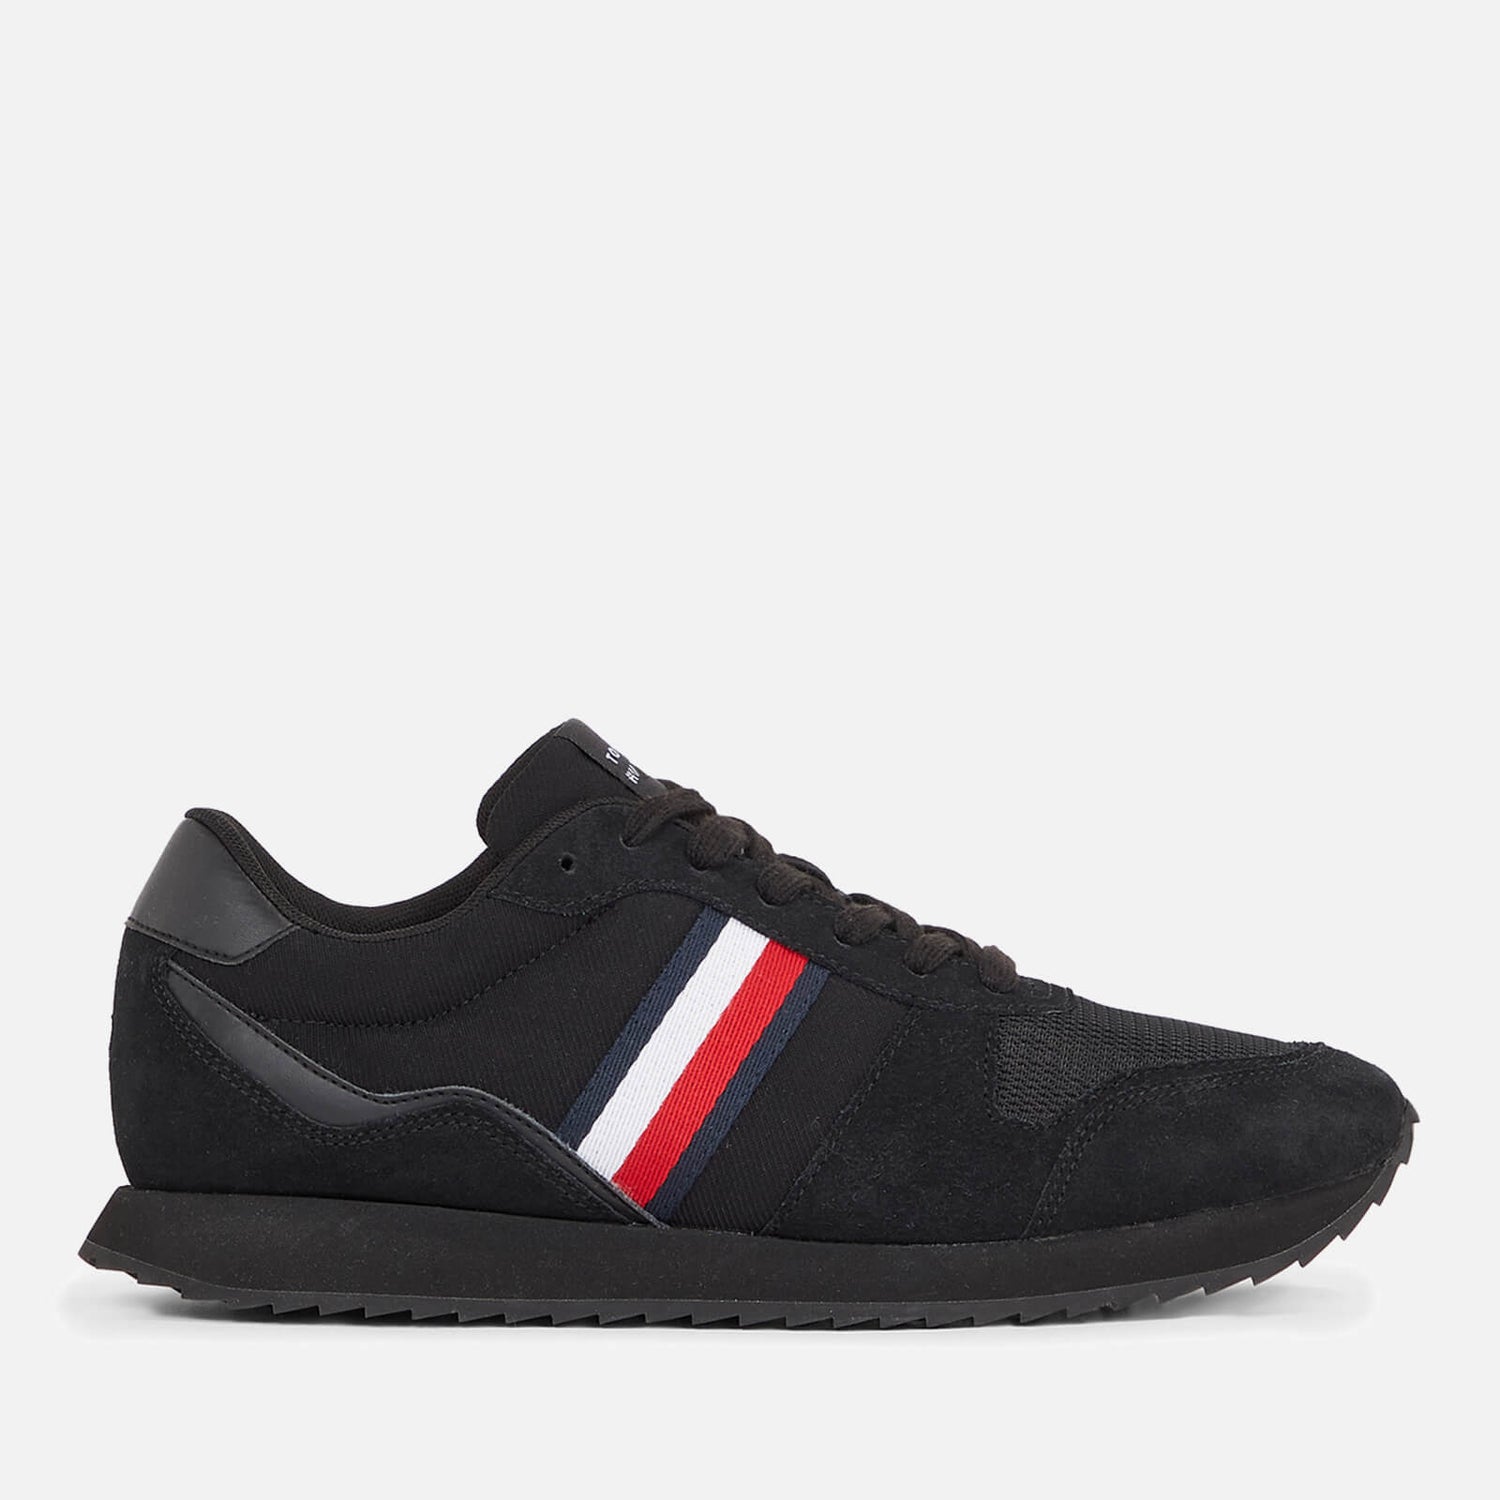 Tommy Hilfiger Men's Evo Mix Suede, Leather and Mesh Trainers - UK 8